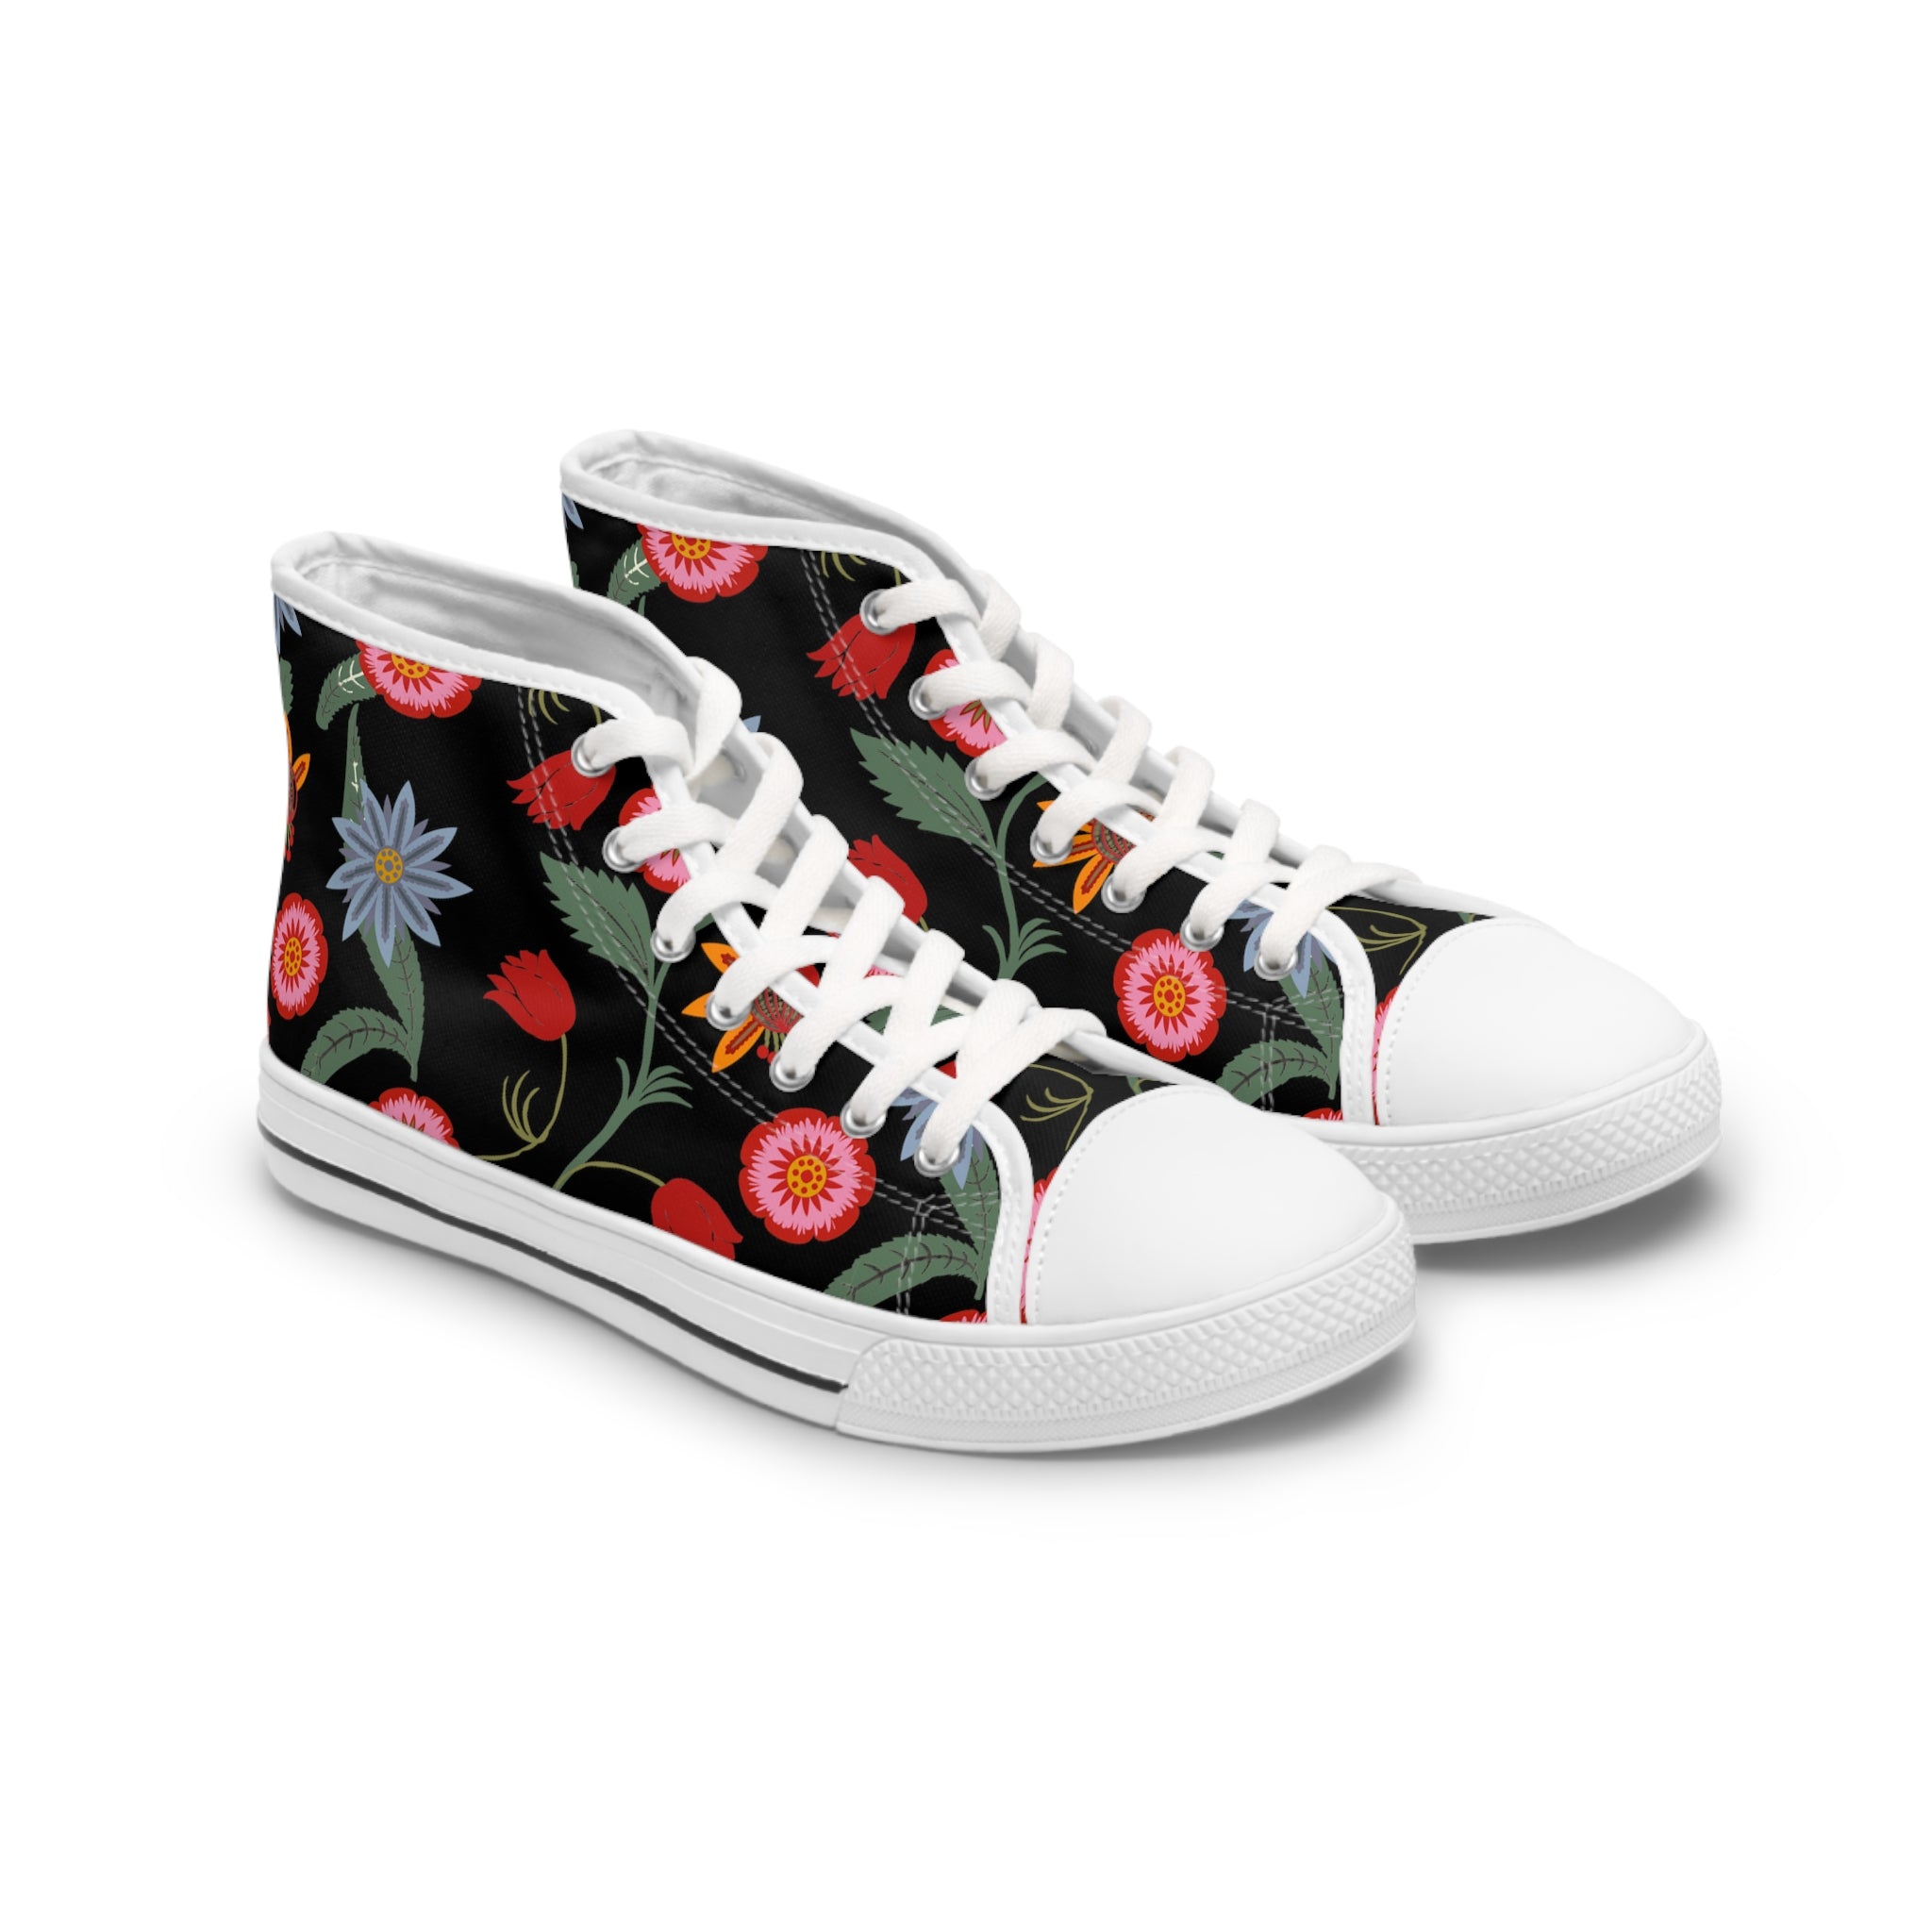 Women's Casual Wear Collection Stay Wild (Flowers) Women's High Top Sneakers, Ladies High-Tops